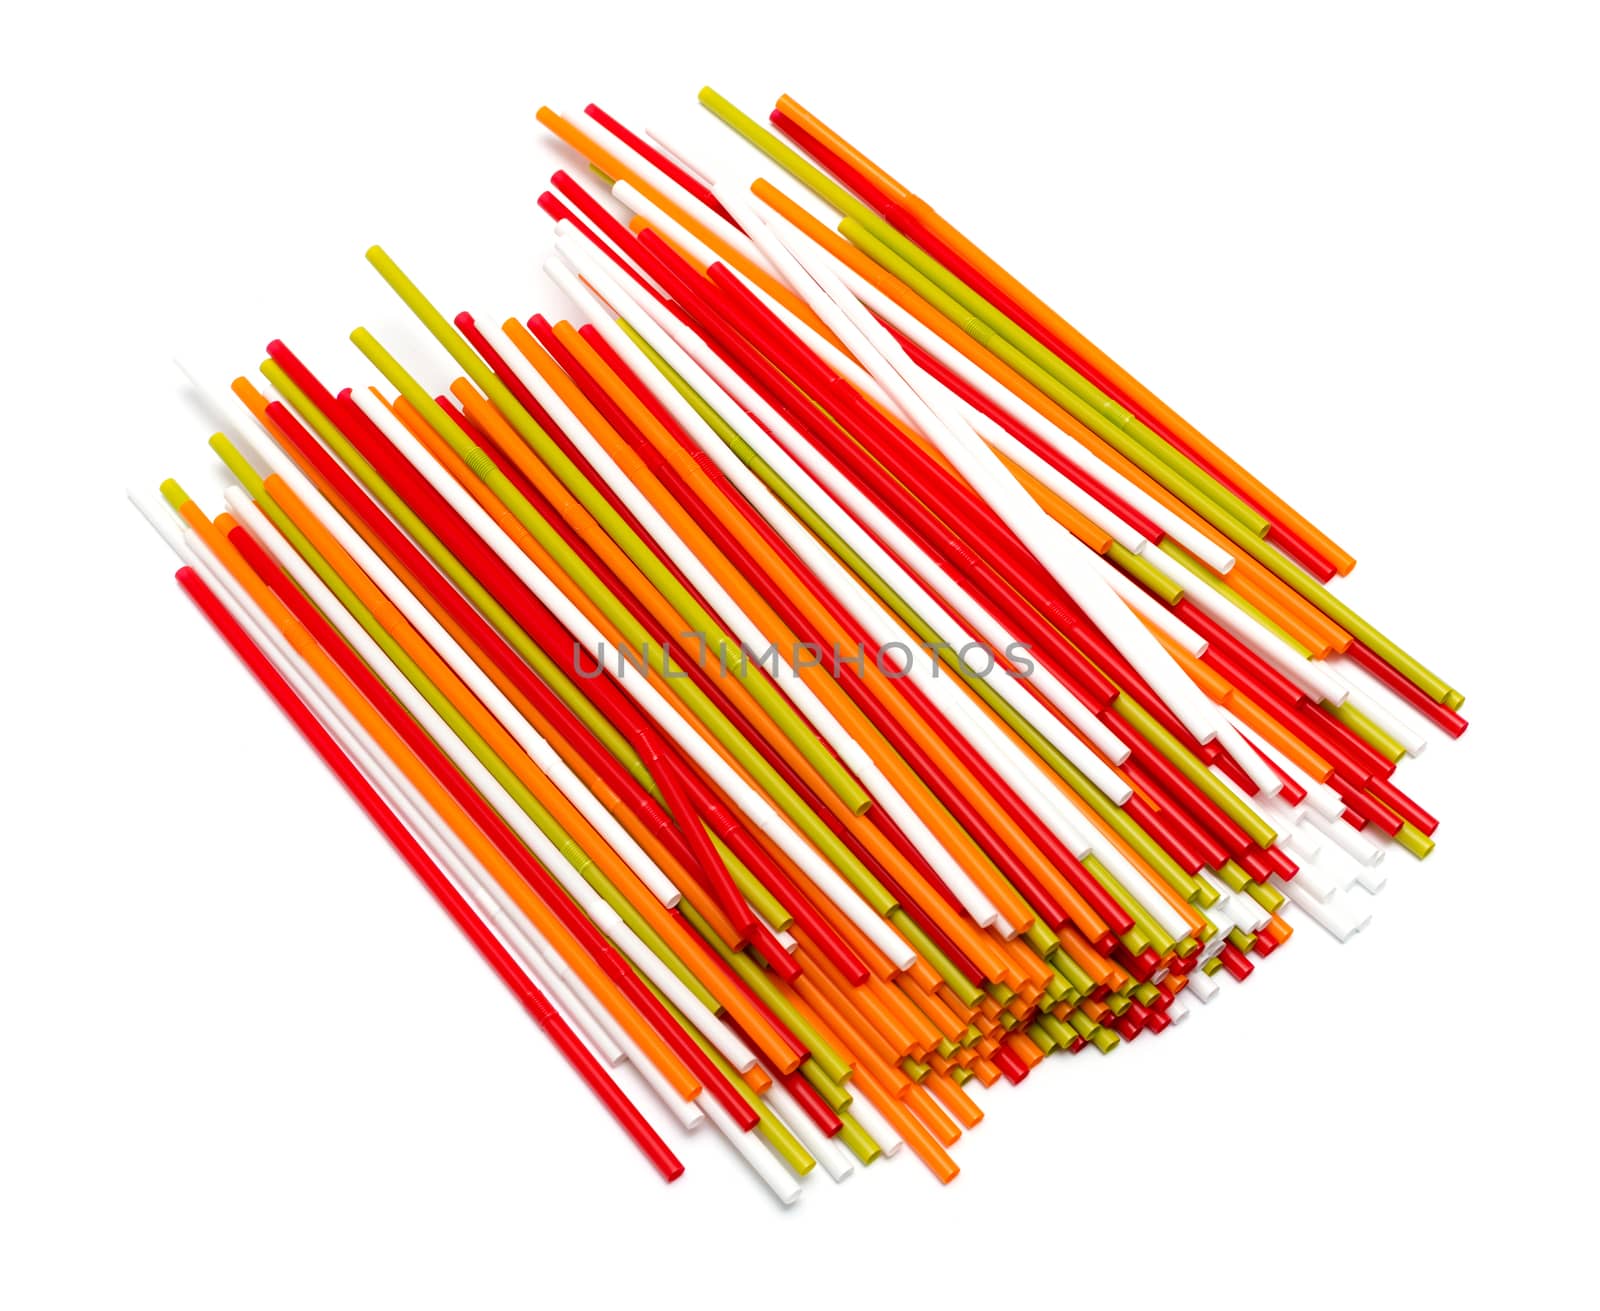 Colorful straws on white background by DNKSTUDIO